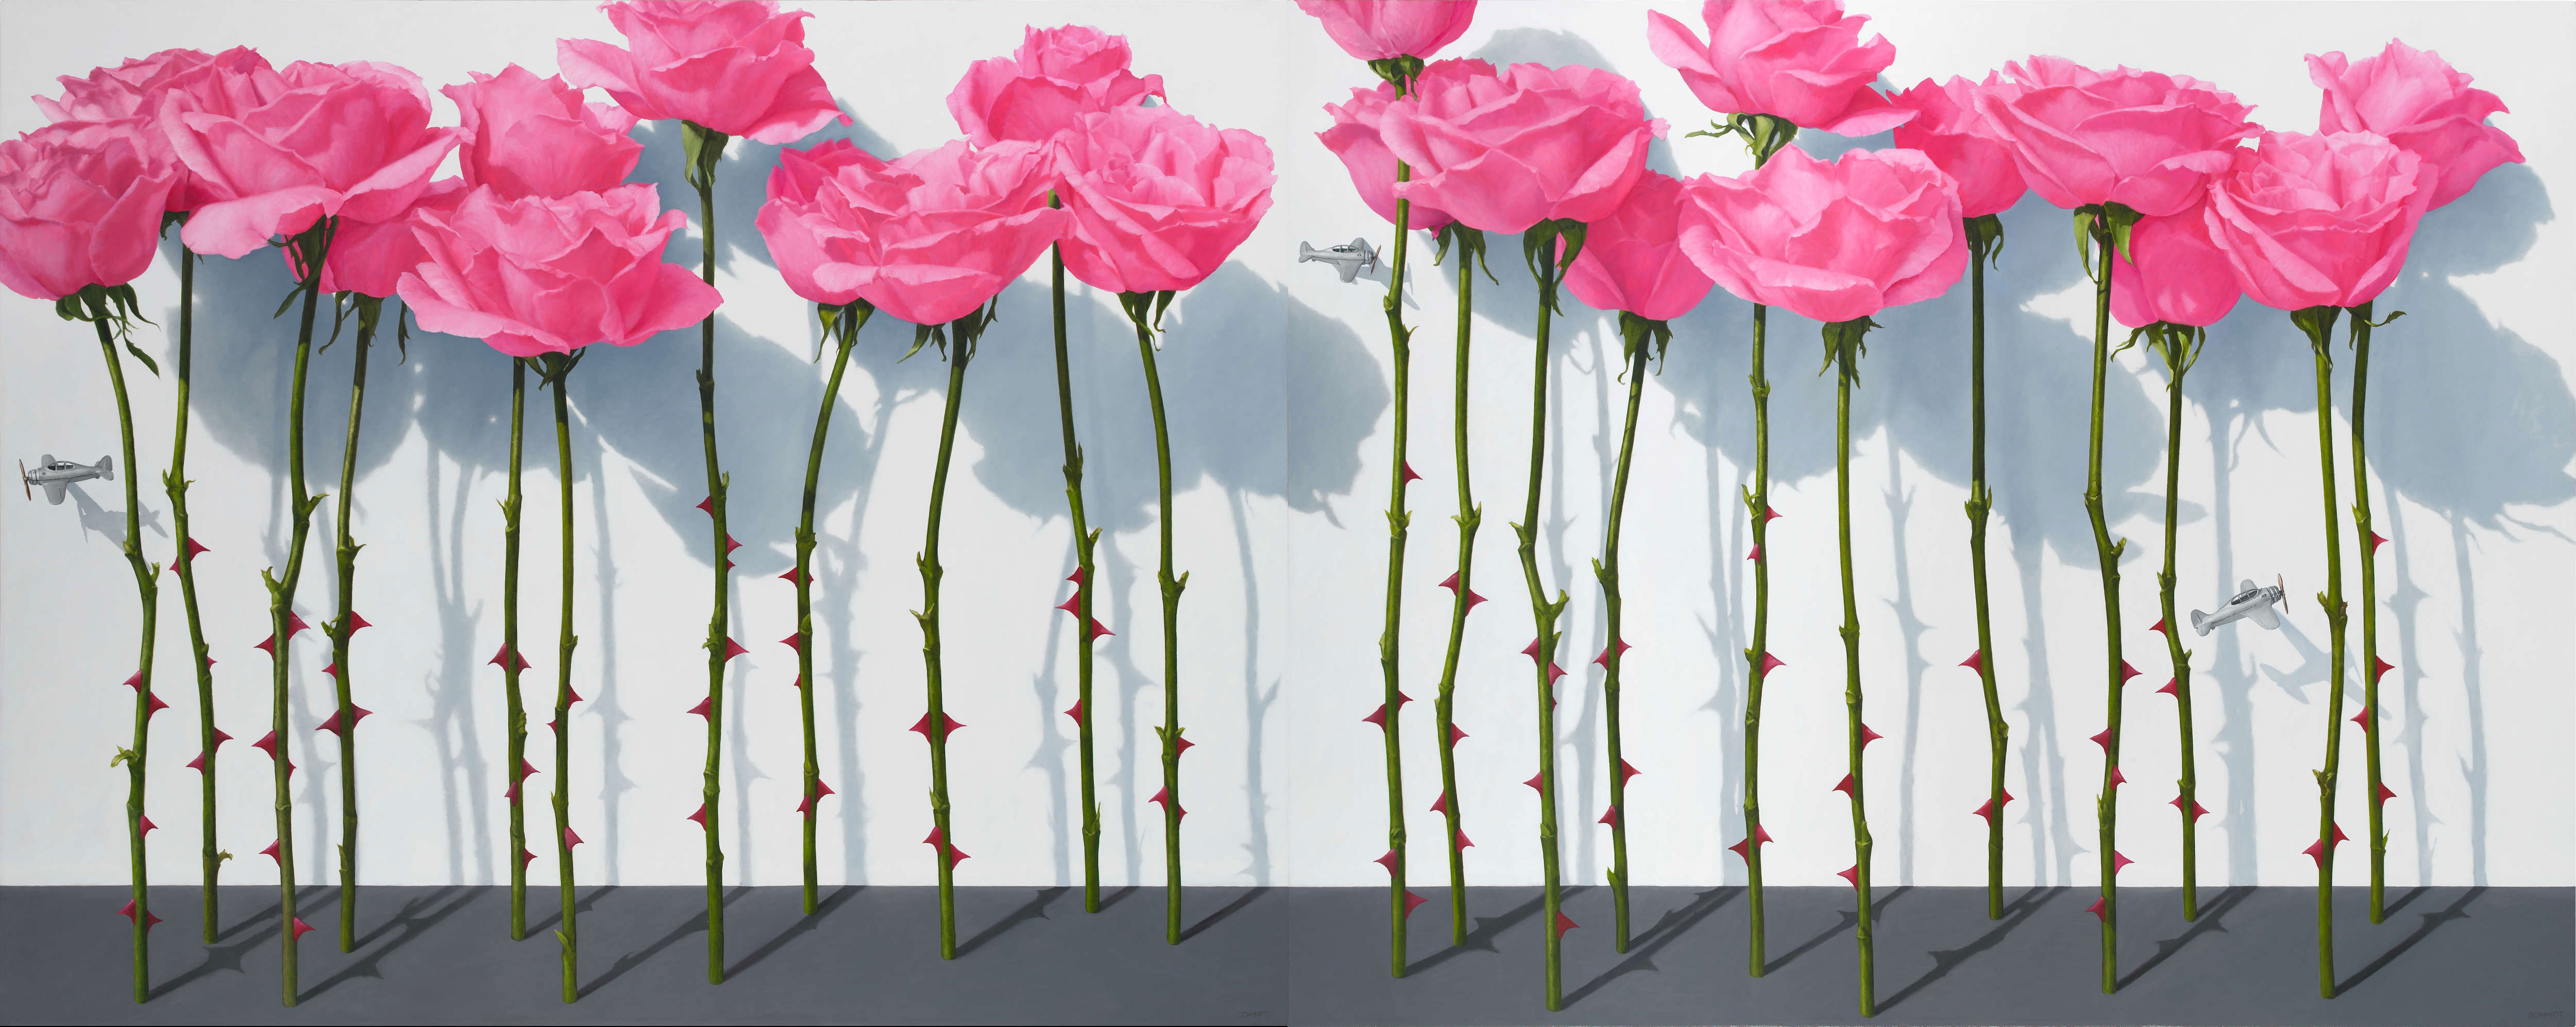 22 pink standing roses, stems and thorns, white wall with shadows, 3 tiny silver airplanes flying